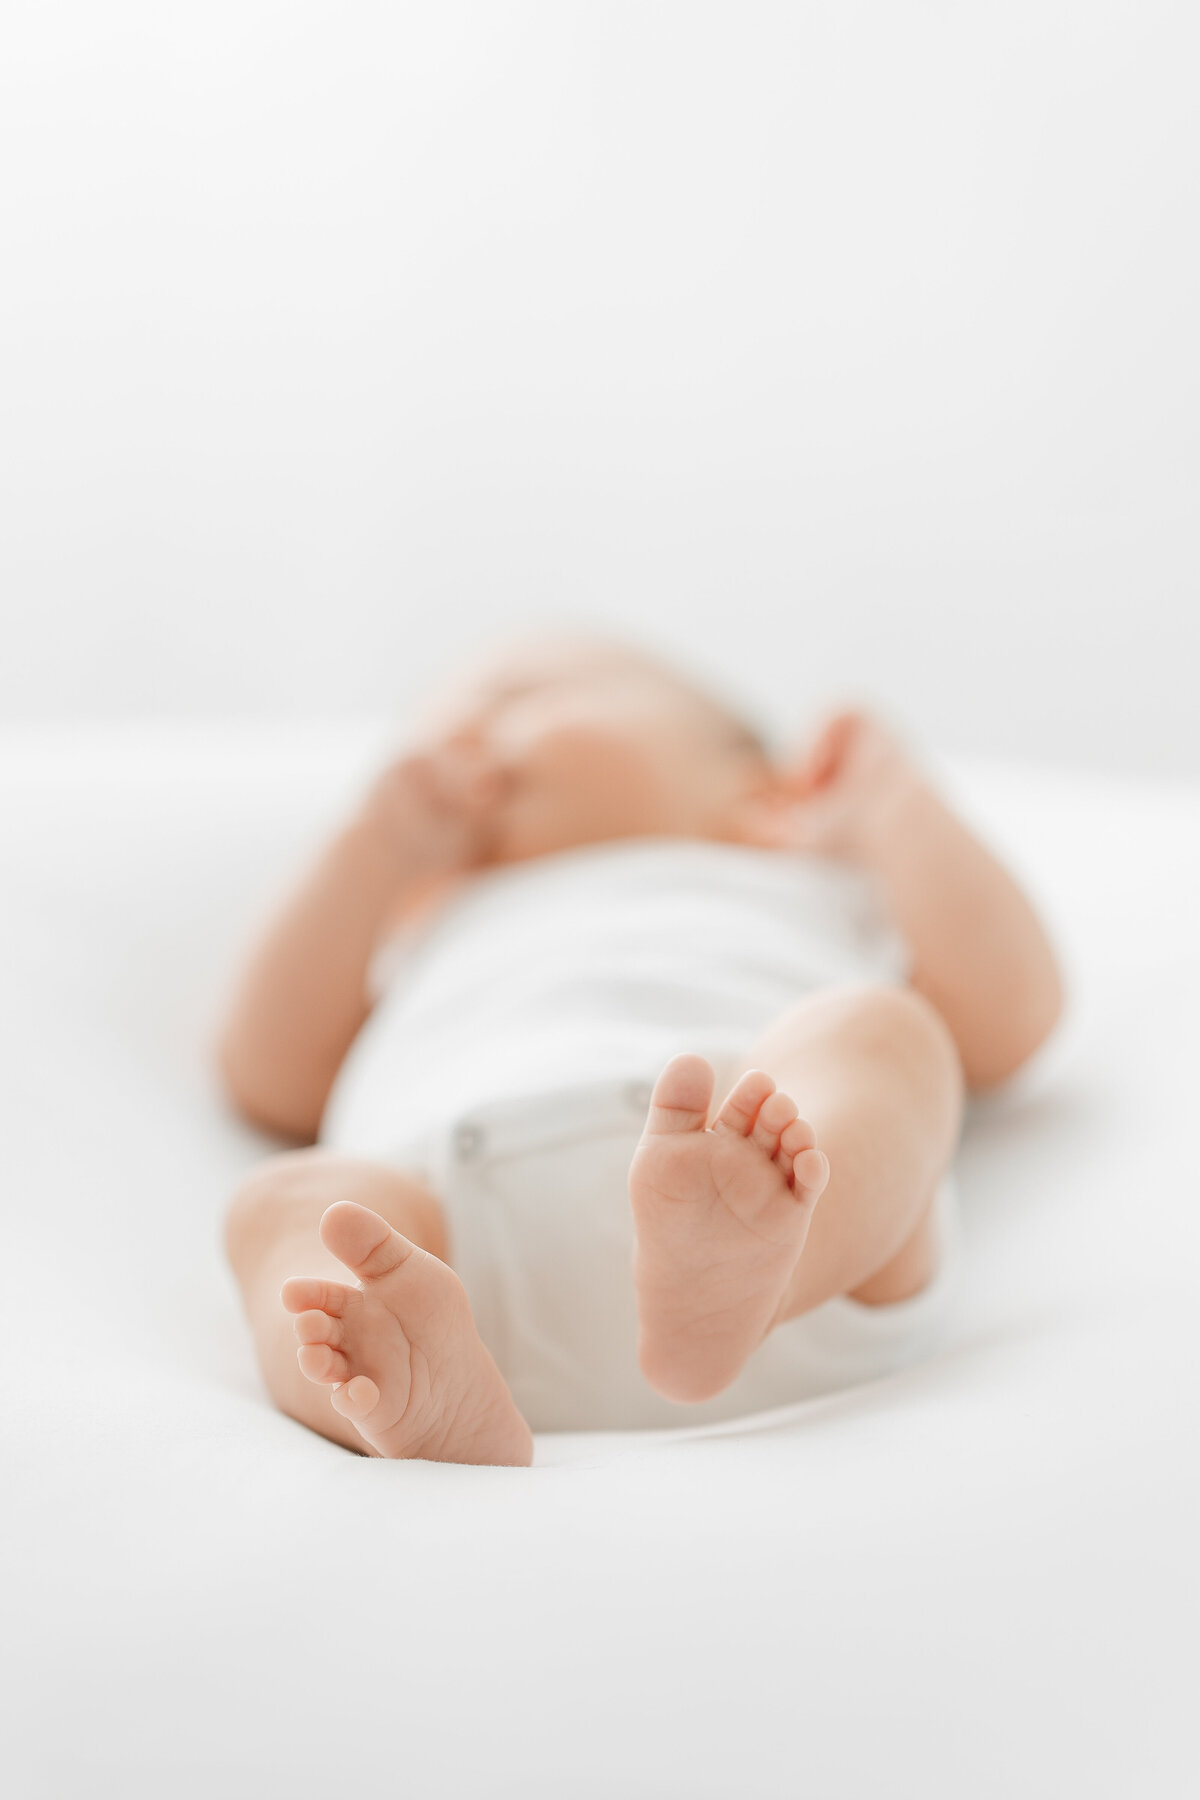 A DC newborn photography photo of a baby laying on its back on a white blanket in front of a window focused on its feet